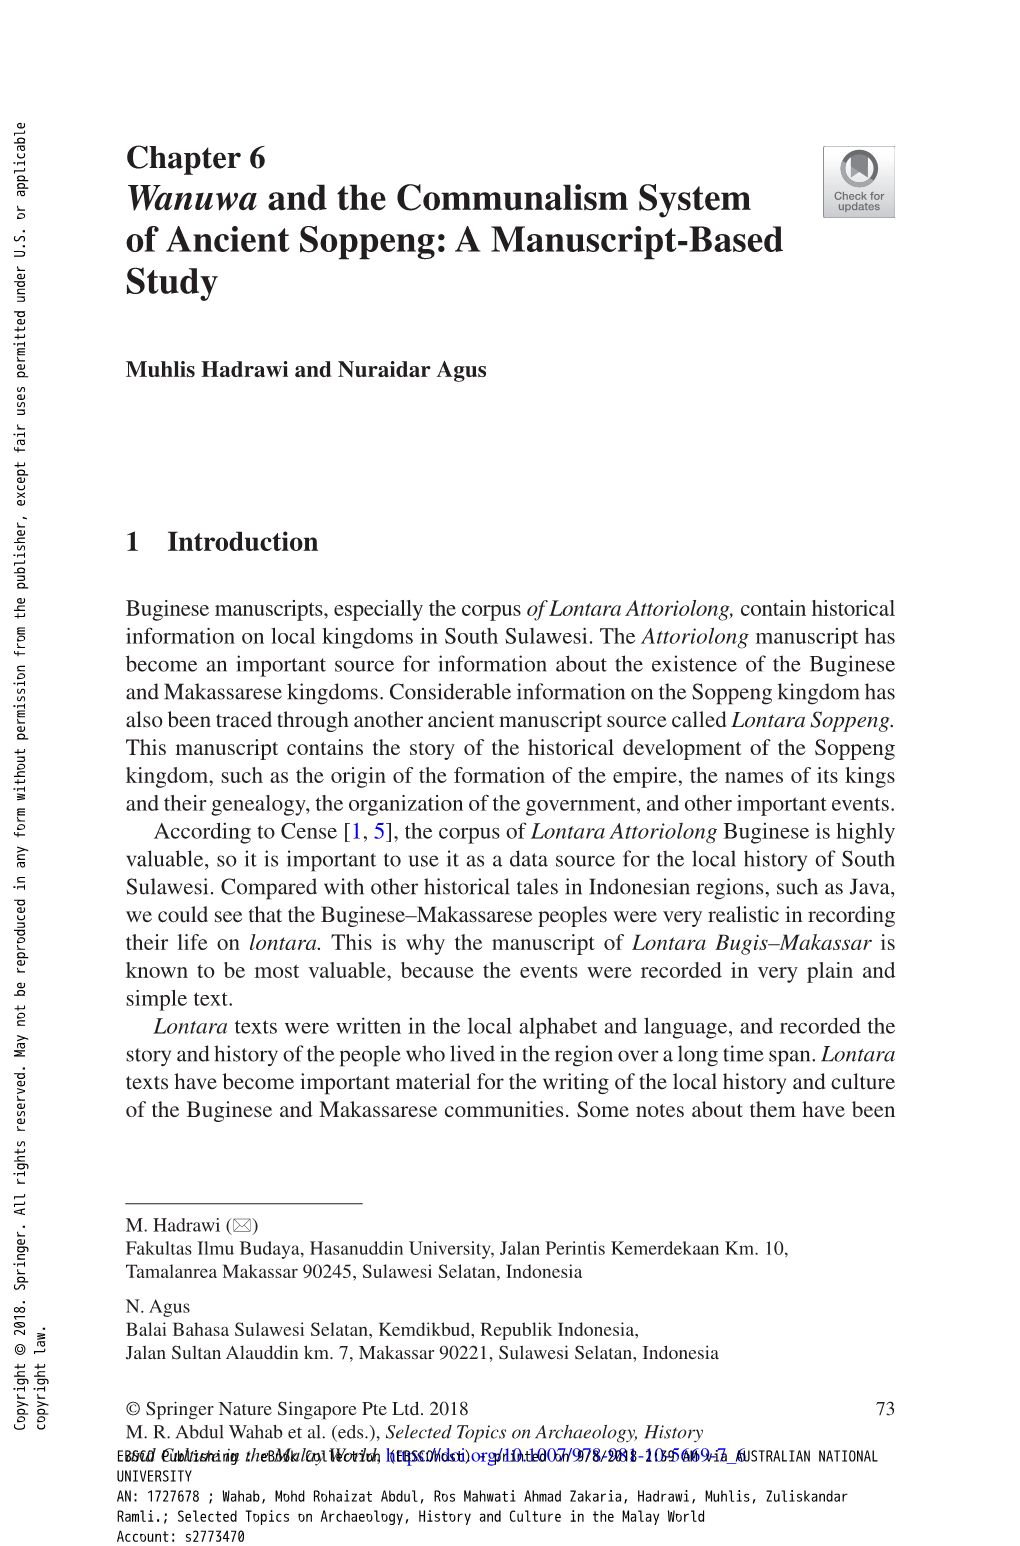 Wanuwa and the Communalism System of Ancient Soppeng: a Manuscript-Based Study